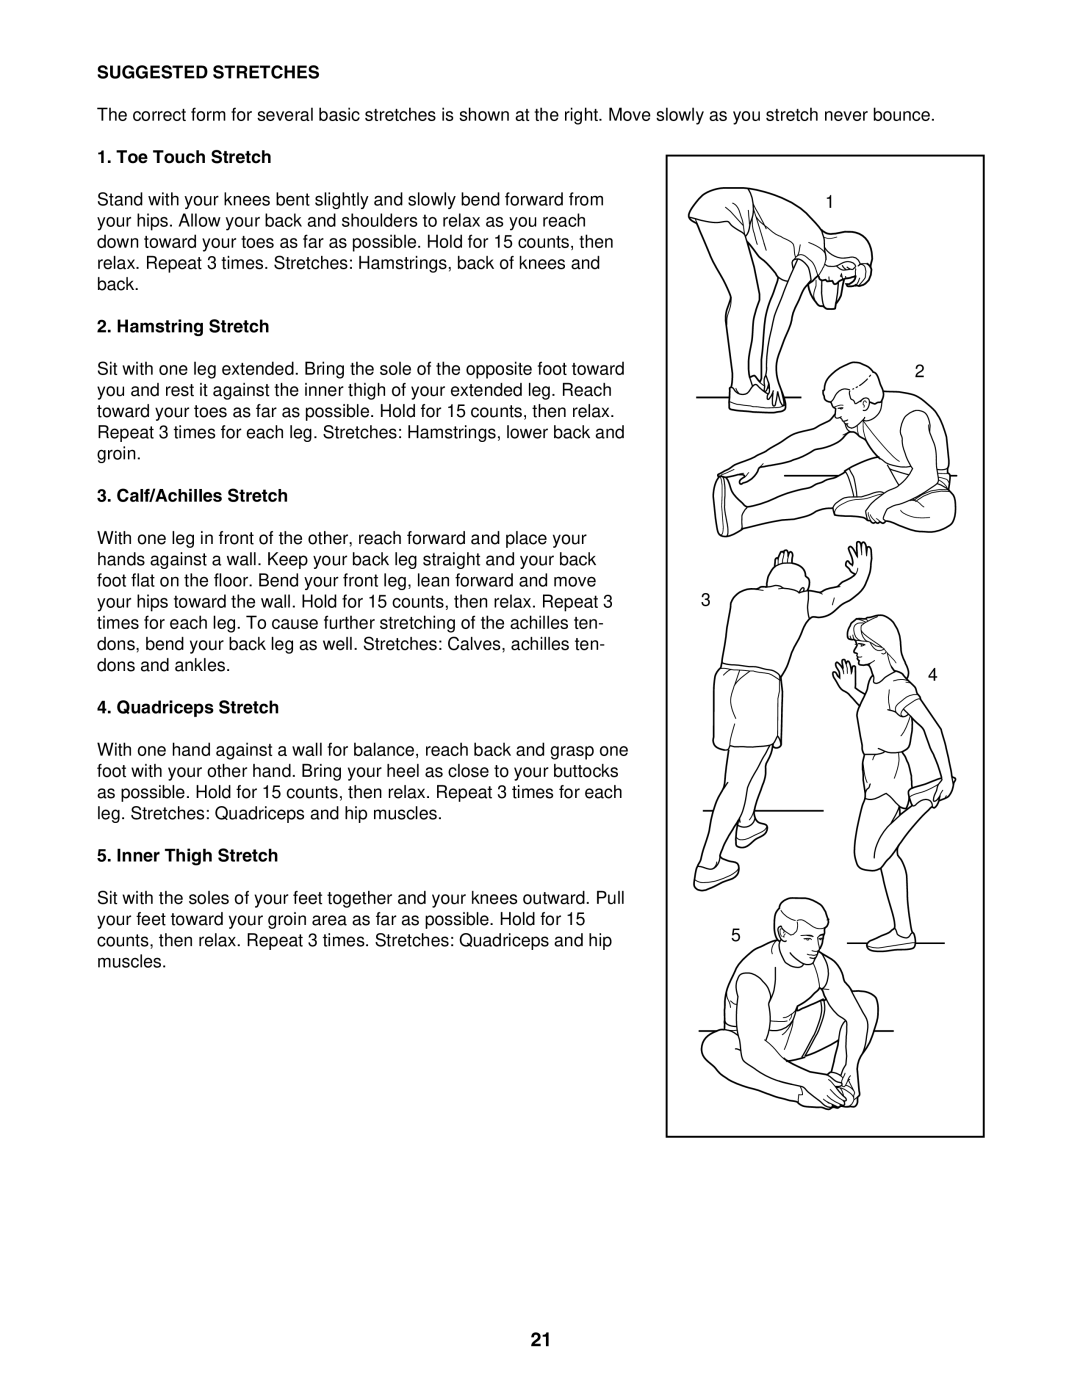 ProForm 831.24623.0 user manual Suggested Stretches 